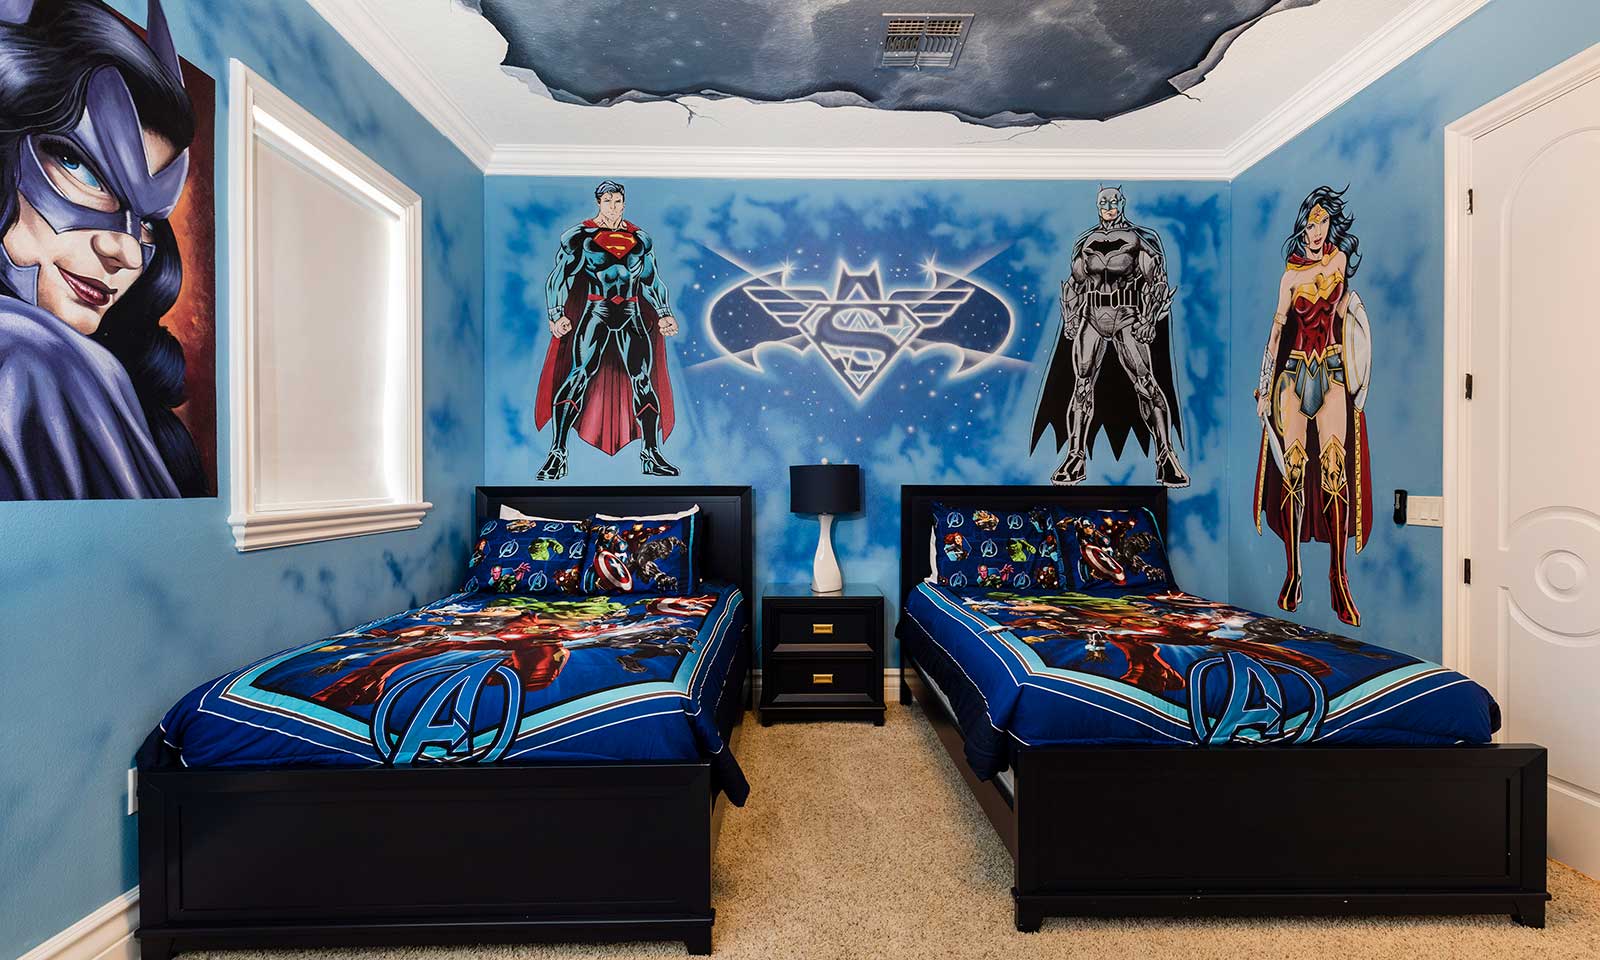 [amenities:Themed-Bedrooms:3] Themed Bedrooms